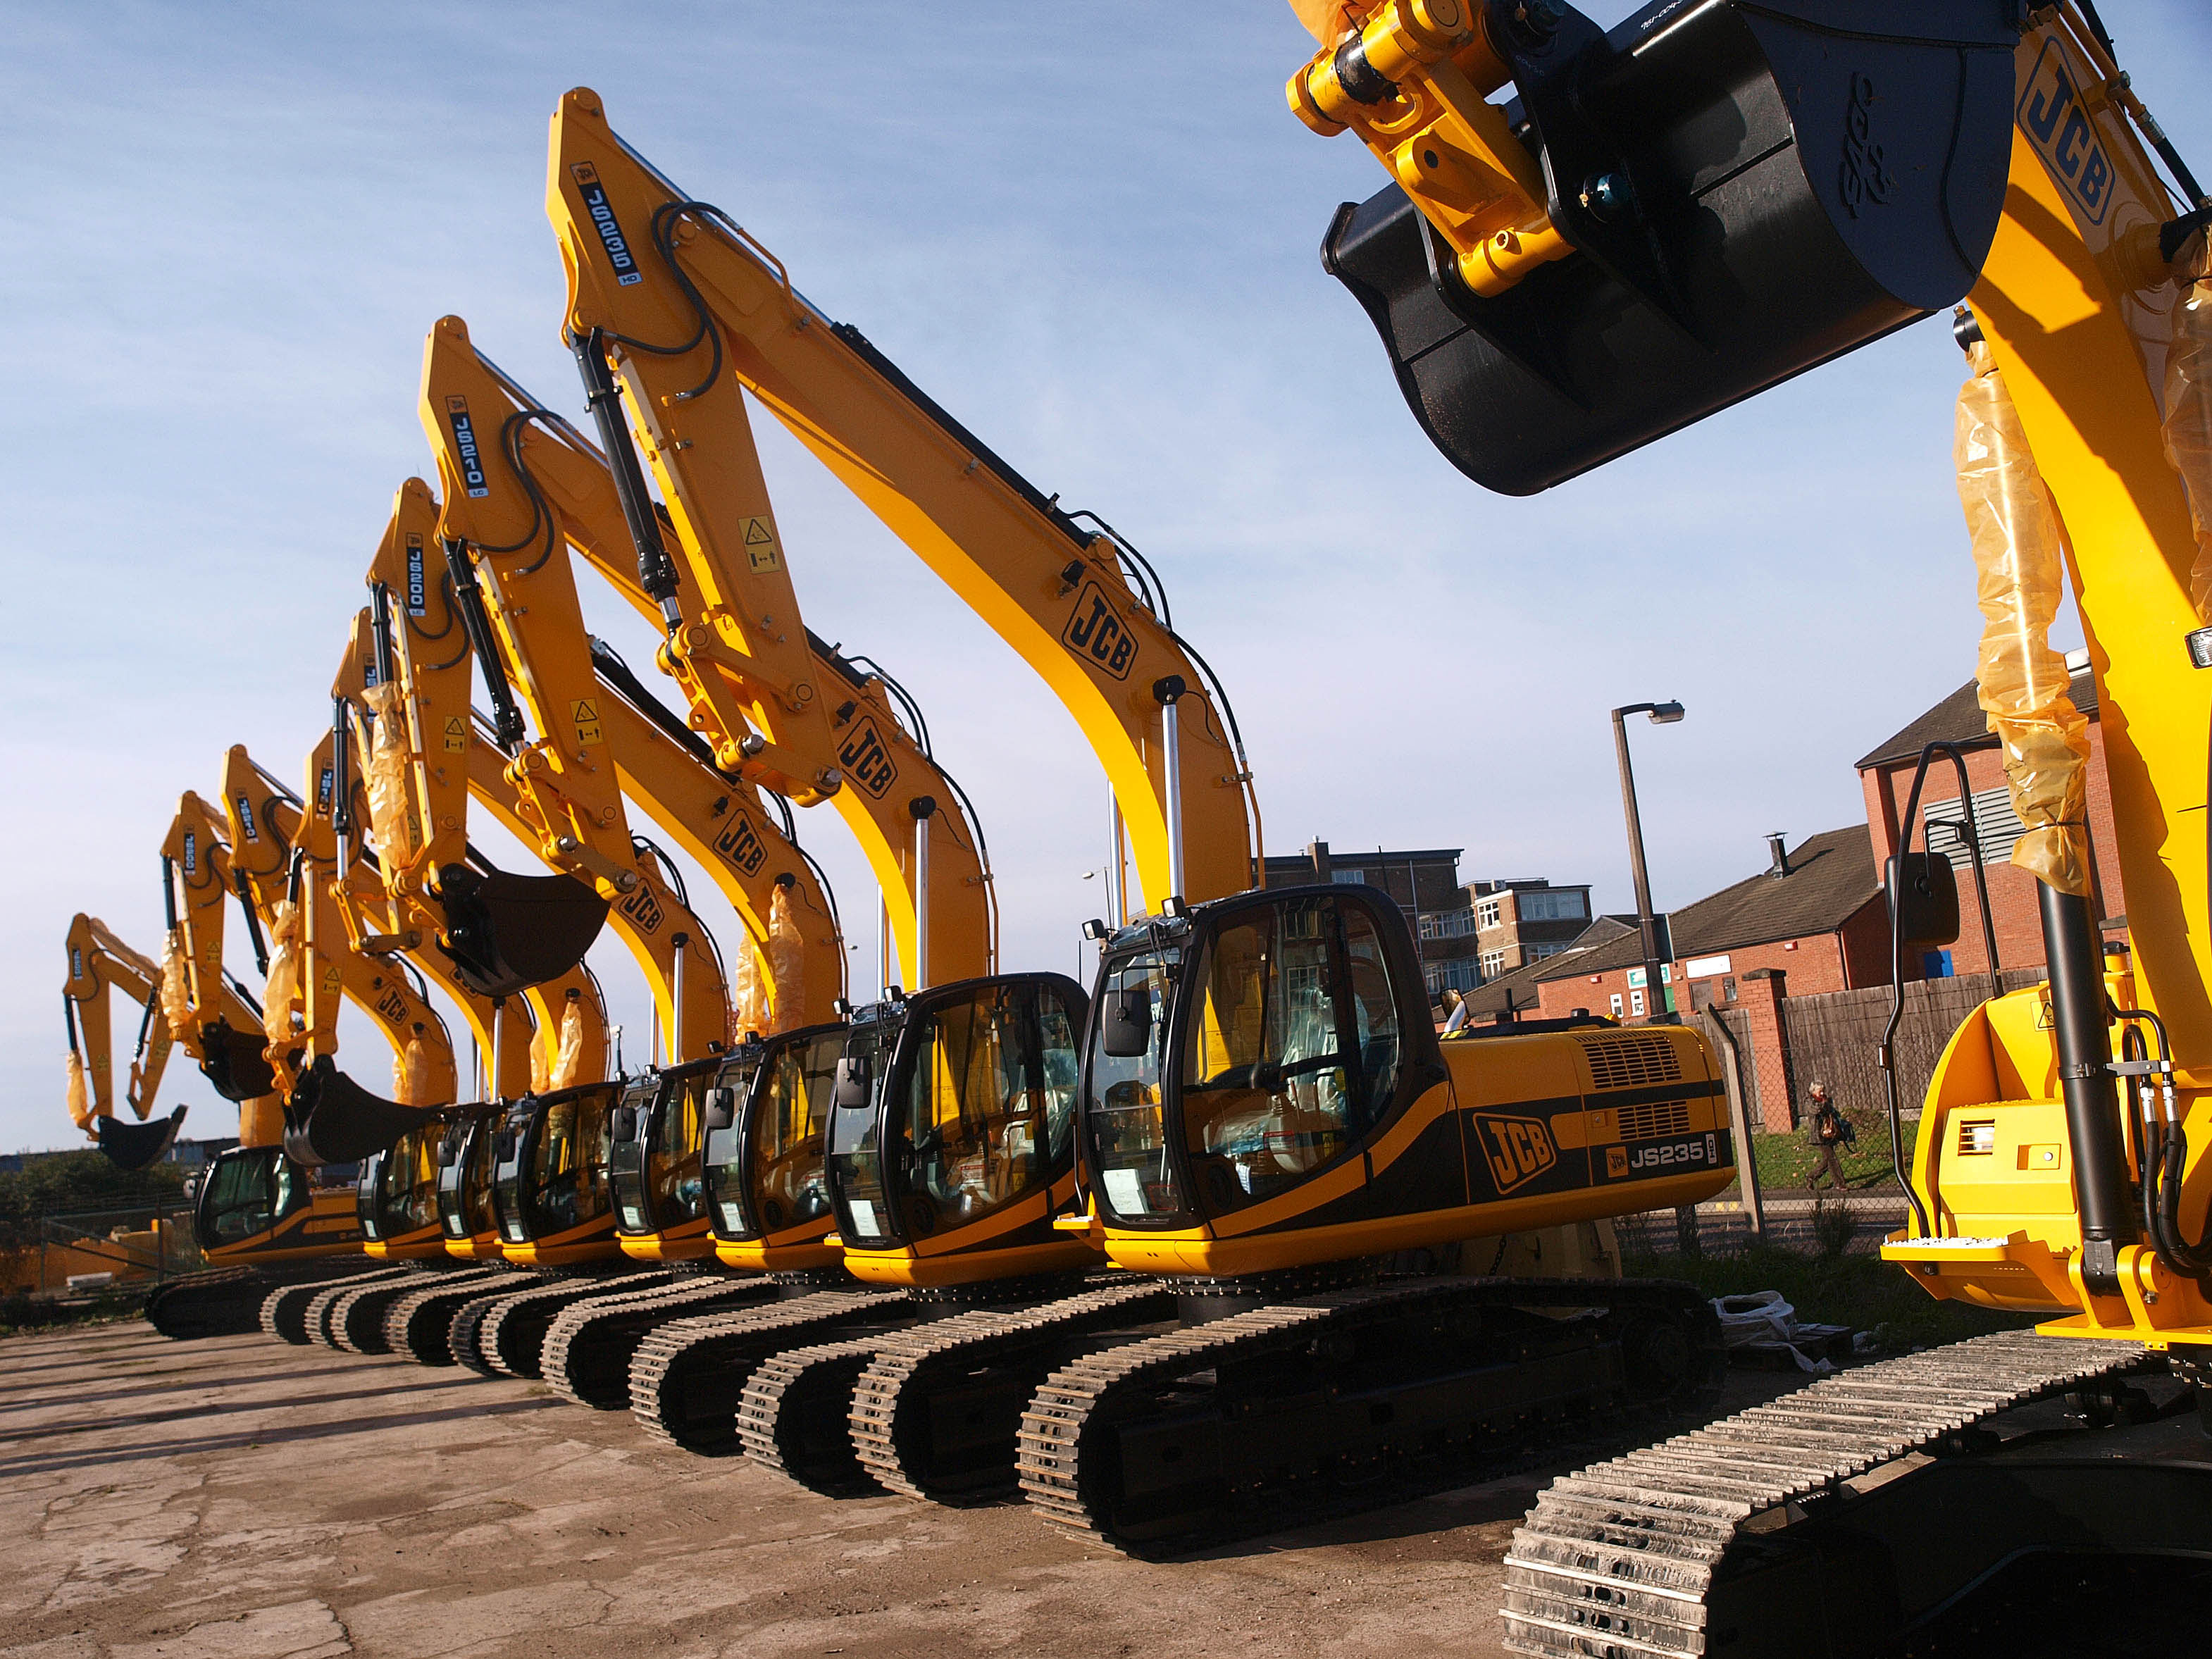 UNITED KINGDOM - OCTOBER 29:JCB earth movers parked at one of the JC Bamford Excavators Ltd. plants in Uttoxeter, U.K., on Wednesday Oct. 29, 2008. Workers at JCB, a closely held U.K. manufac